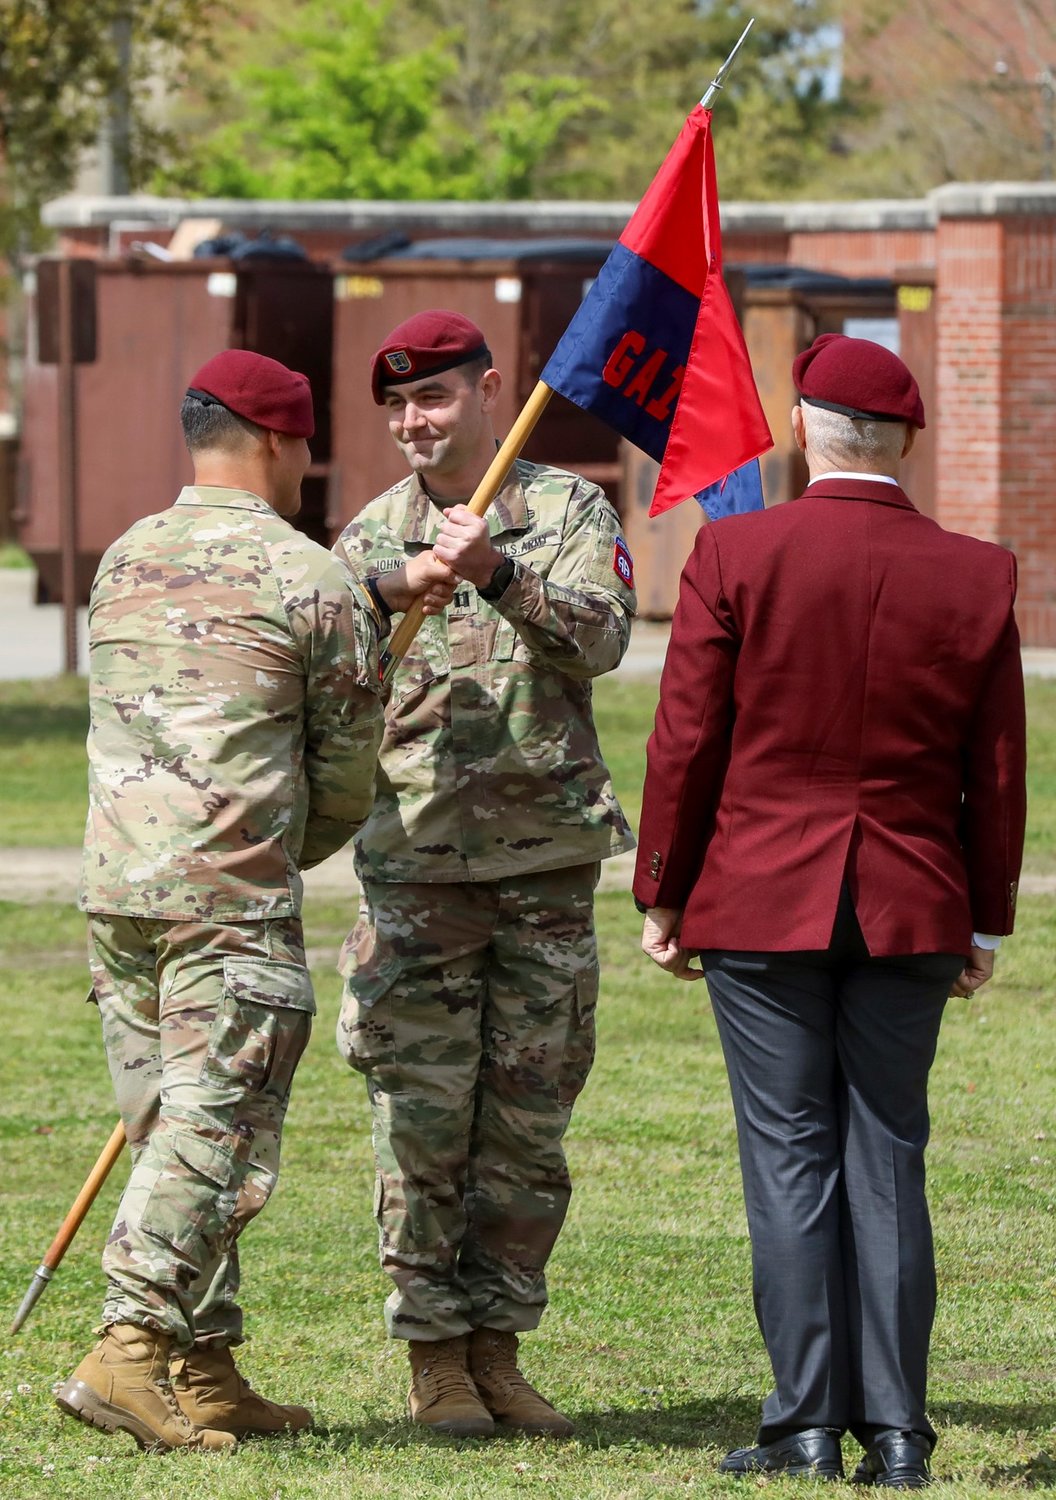 Lt. Col. Leif Thaxton, commander of Headquarters and Headquarters Battalion, 82nd Airborne Division, passes the guidon to Capt. Adam Johnson, commander of Gainey Company, during the uncasing ceremony of Gainey Company on Fort Bragg on Wednesday.